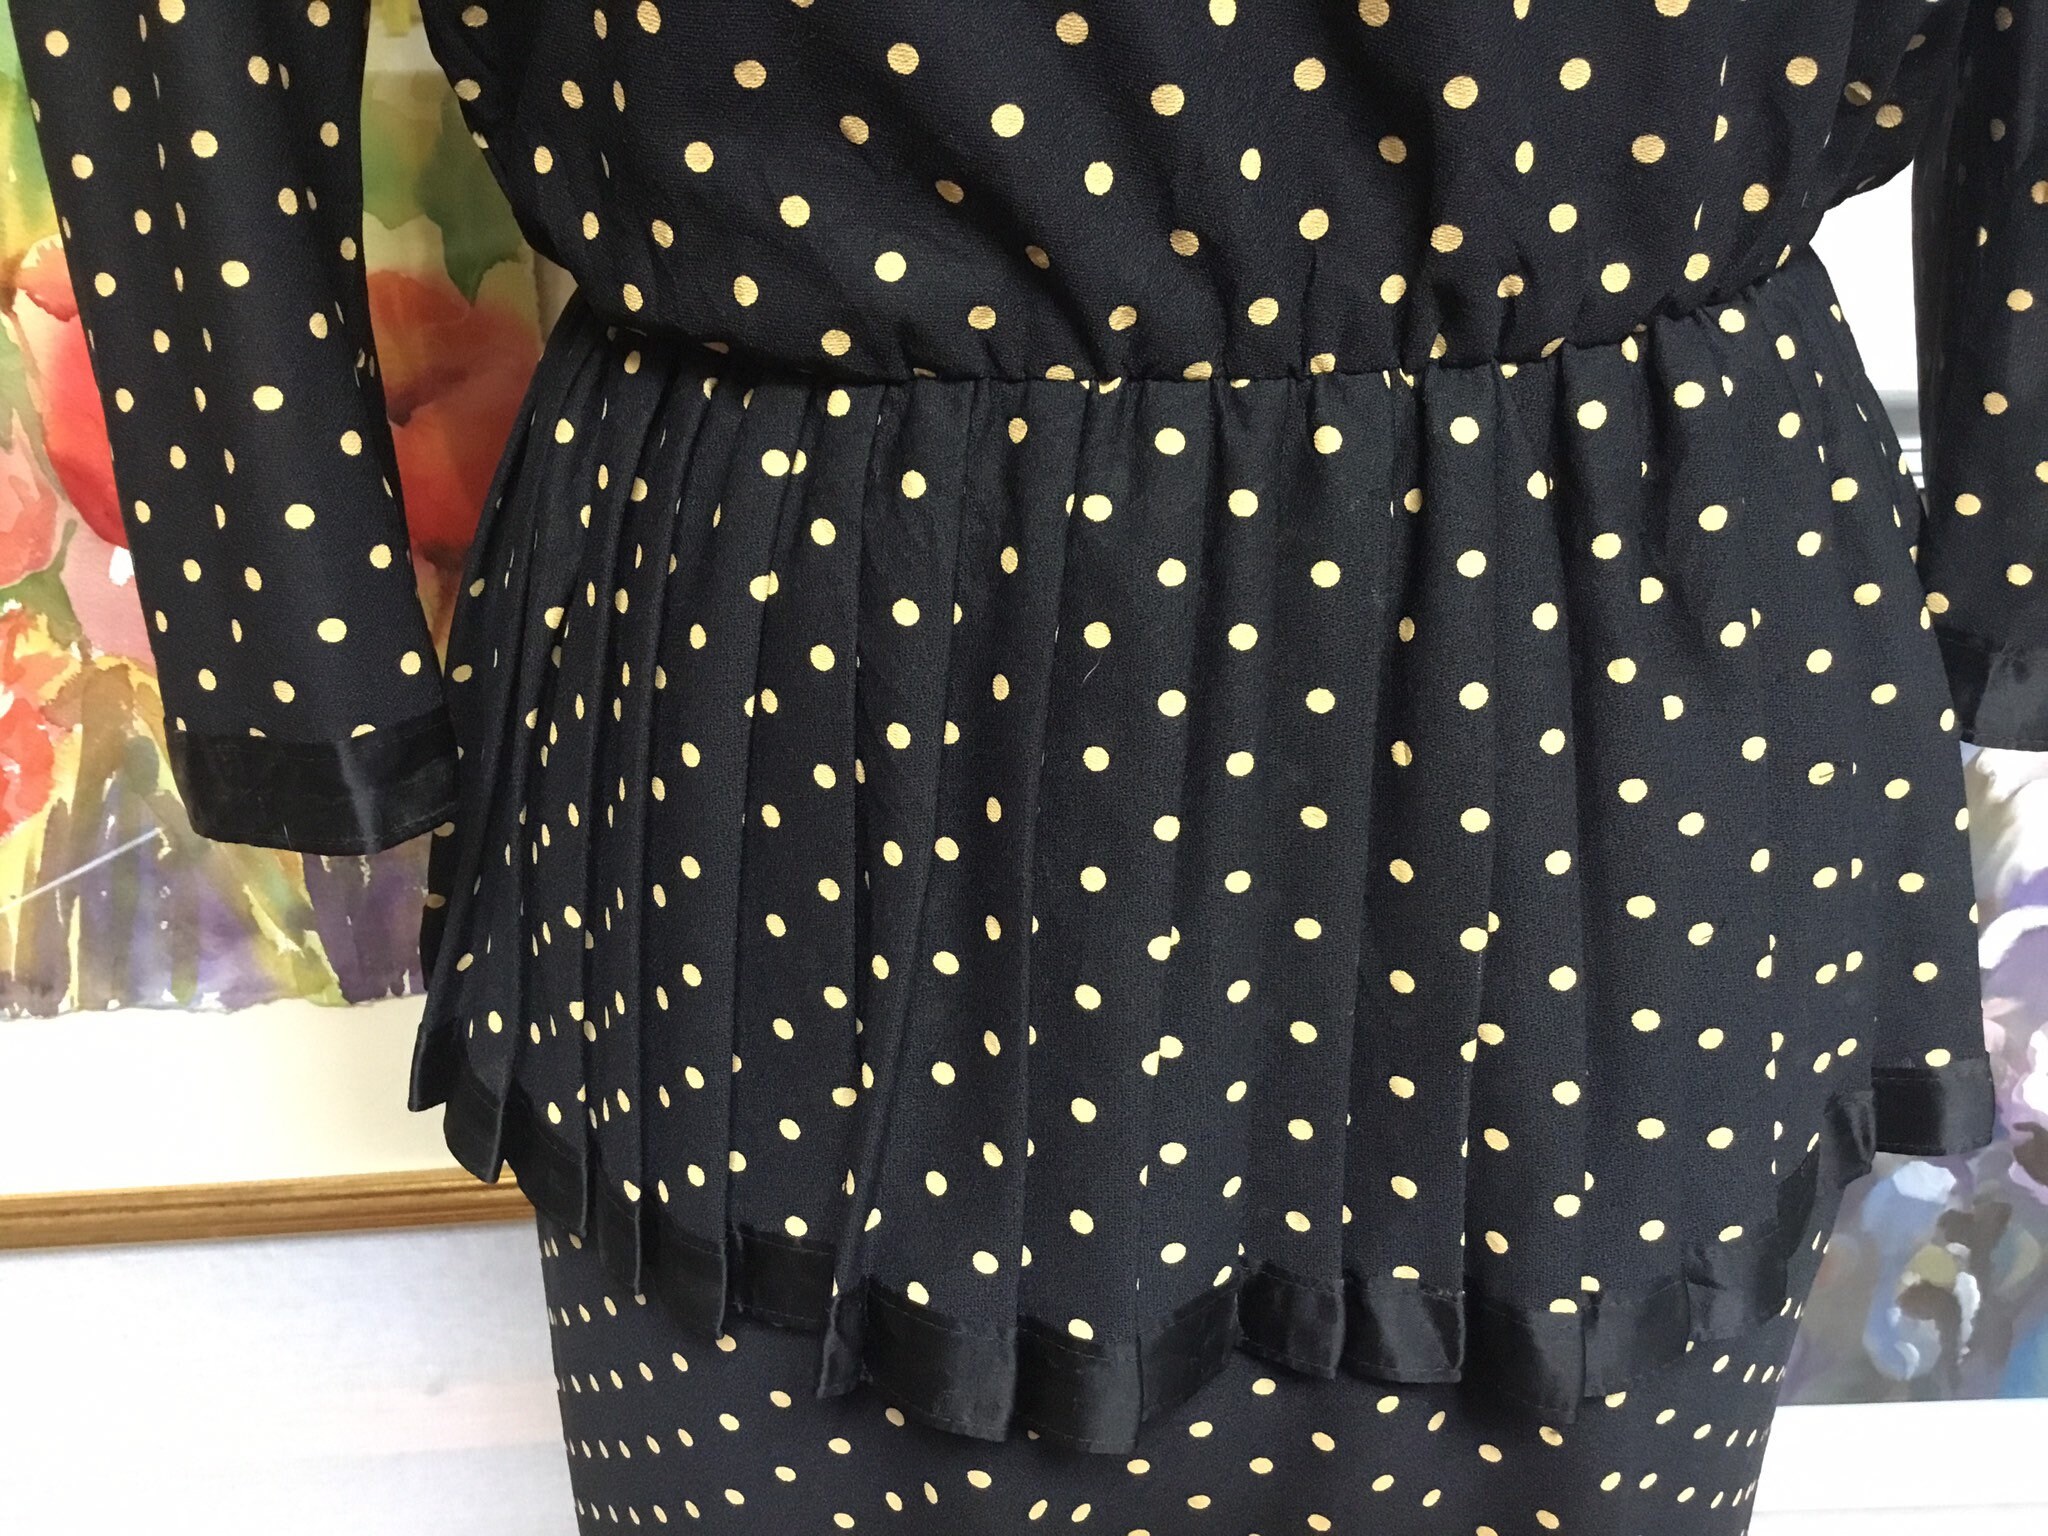 Vintage dress 1980s polka dot in black and cream with pleated | Etsy